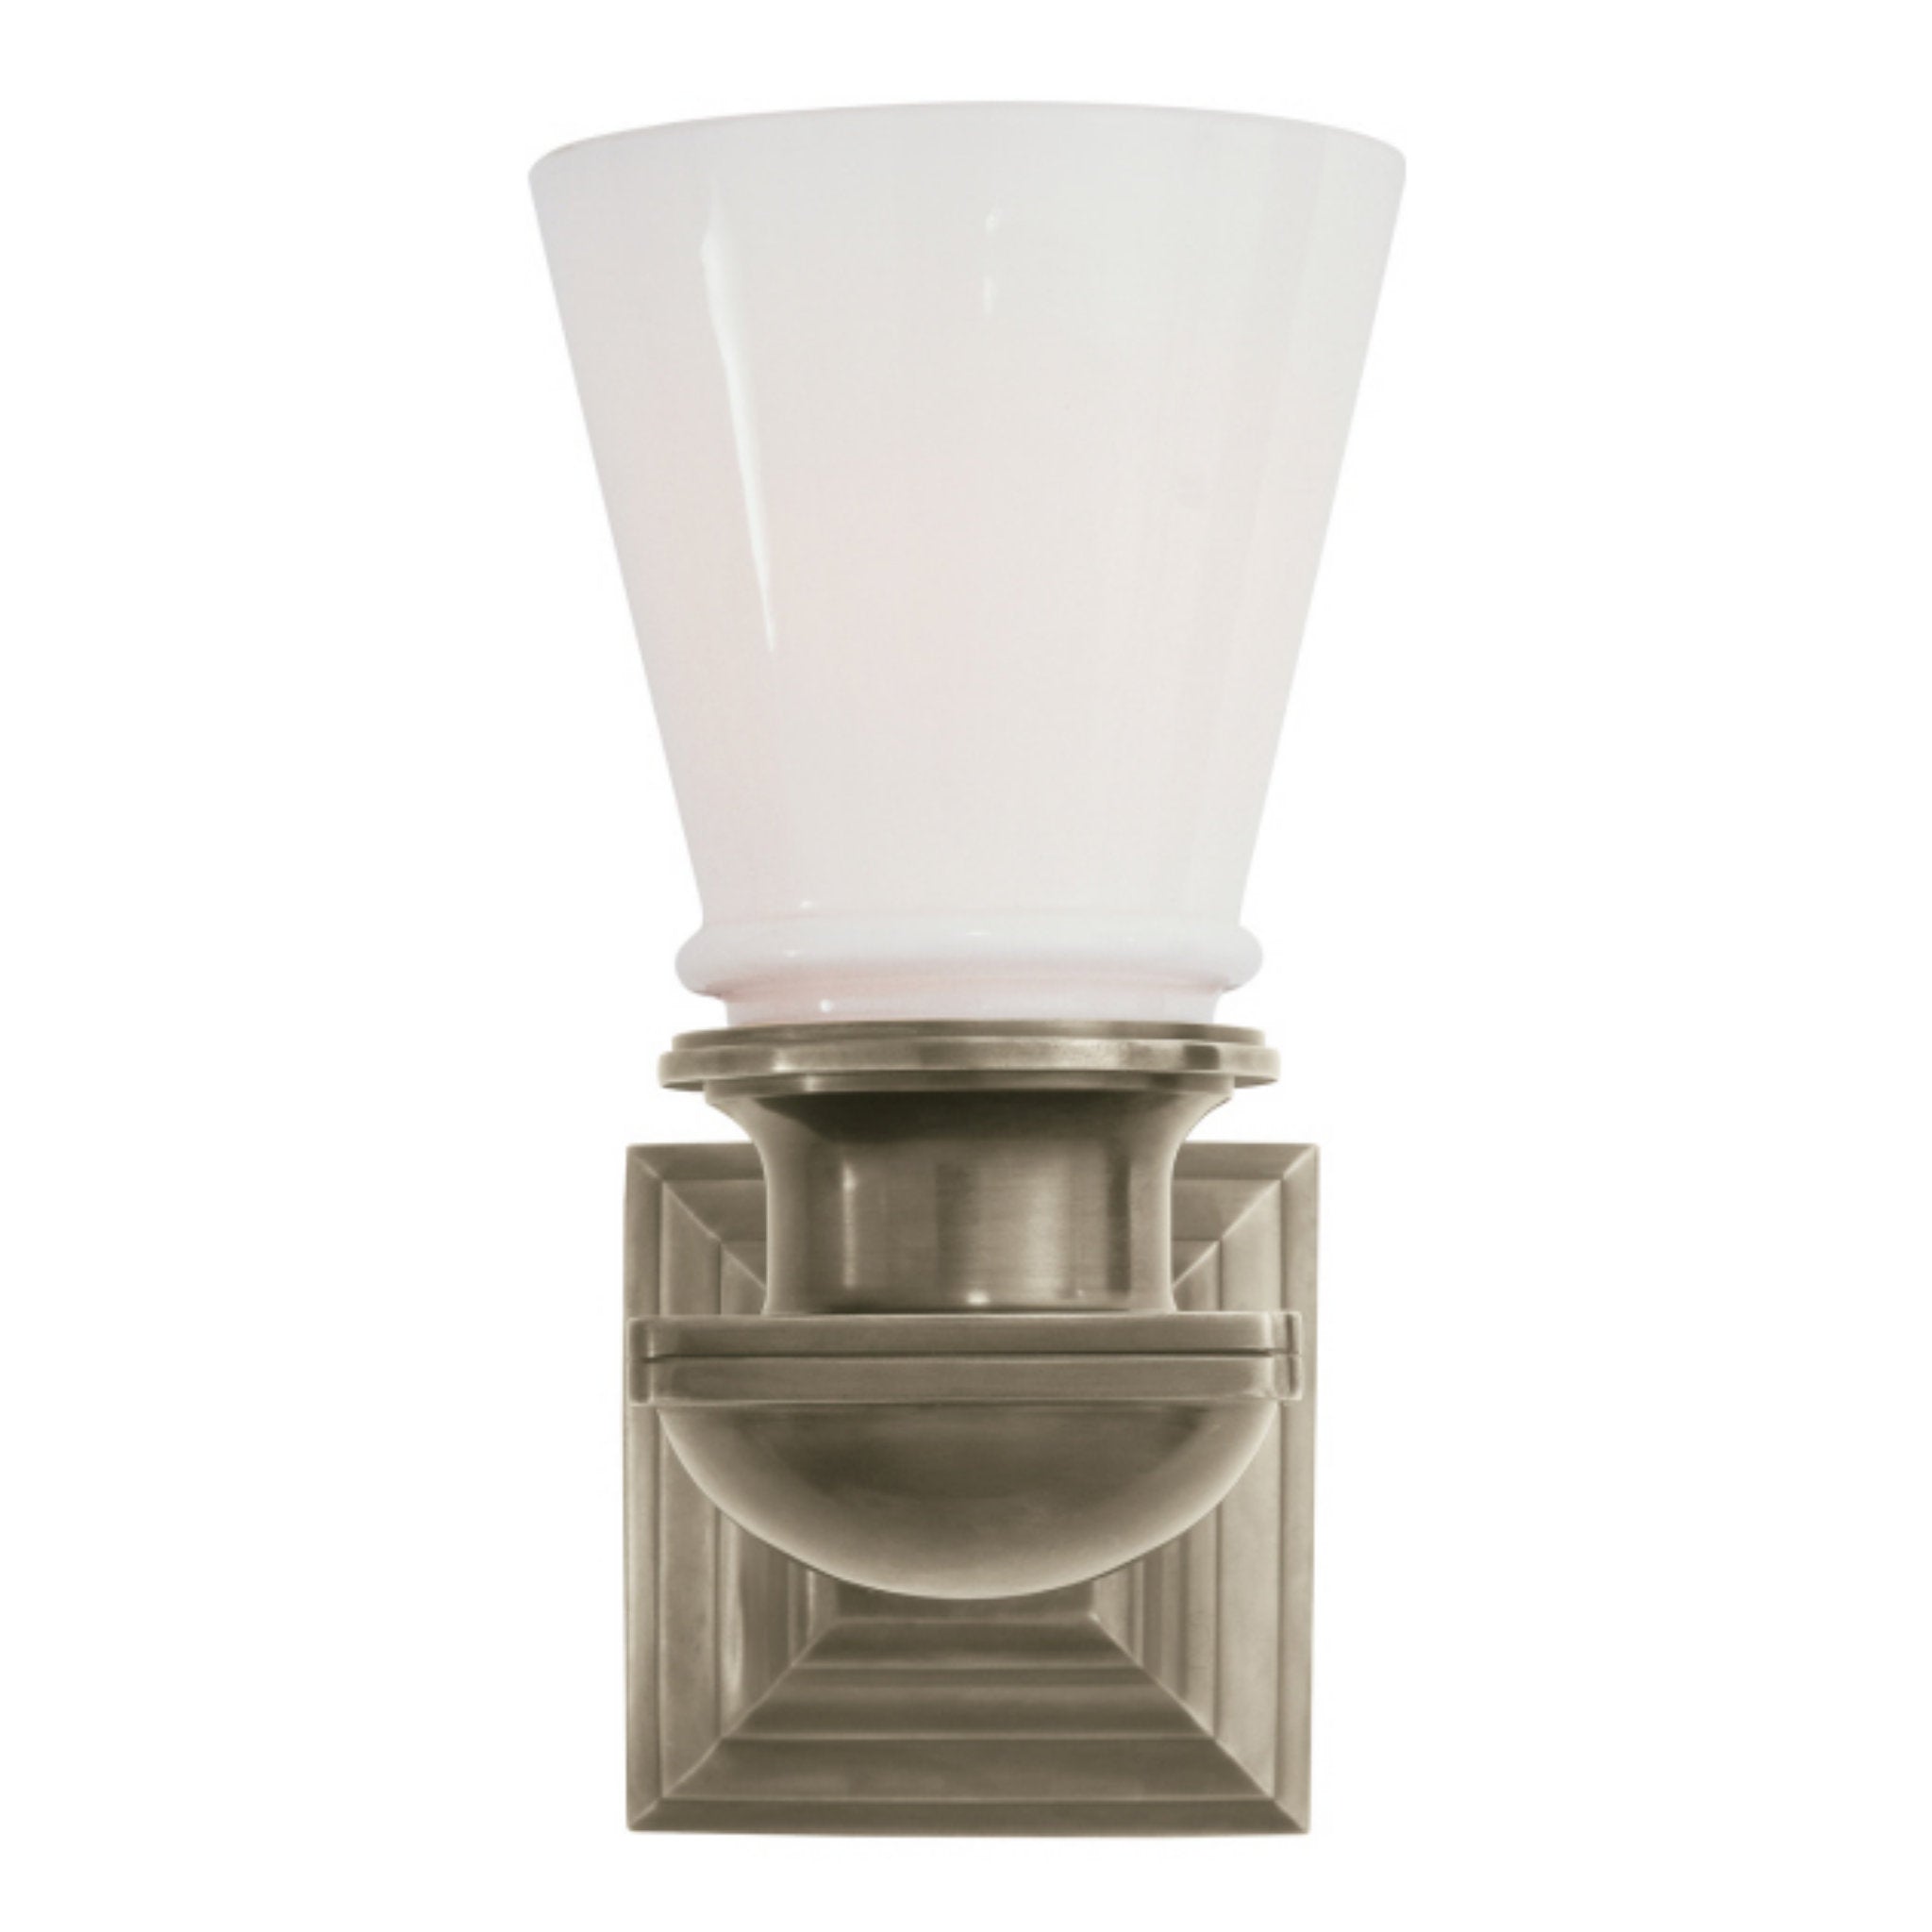 Chapman & Myers New York Subway Single Light in Antique Nickel with White Glass